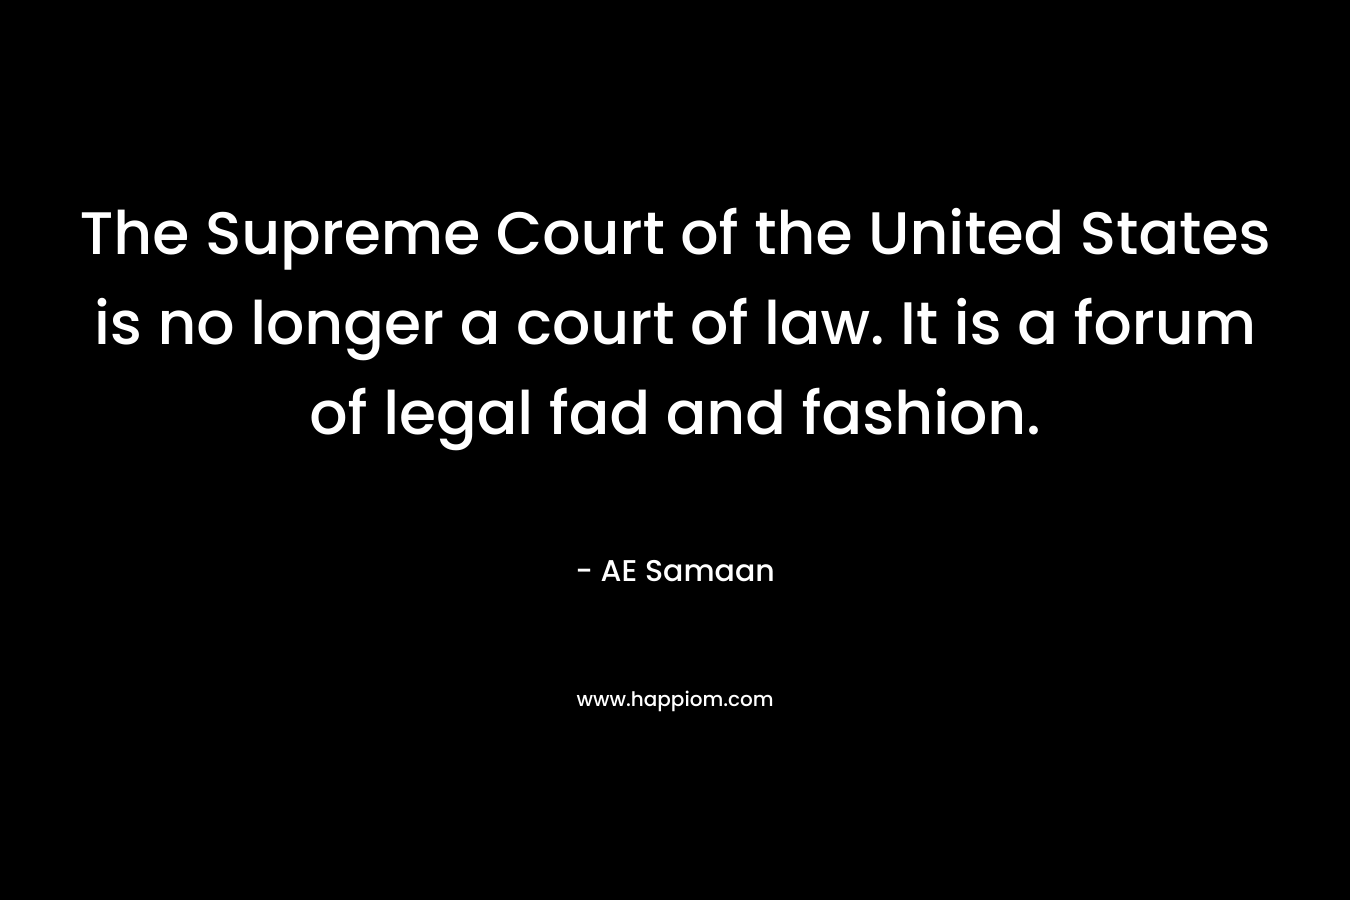 The Supreme Court of the United States is no longer a court of law. It is a forum of legal fad and fashion.